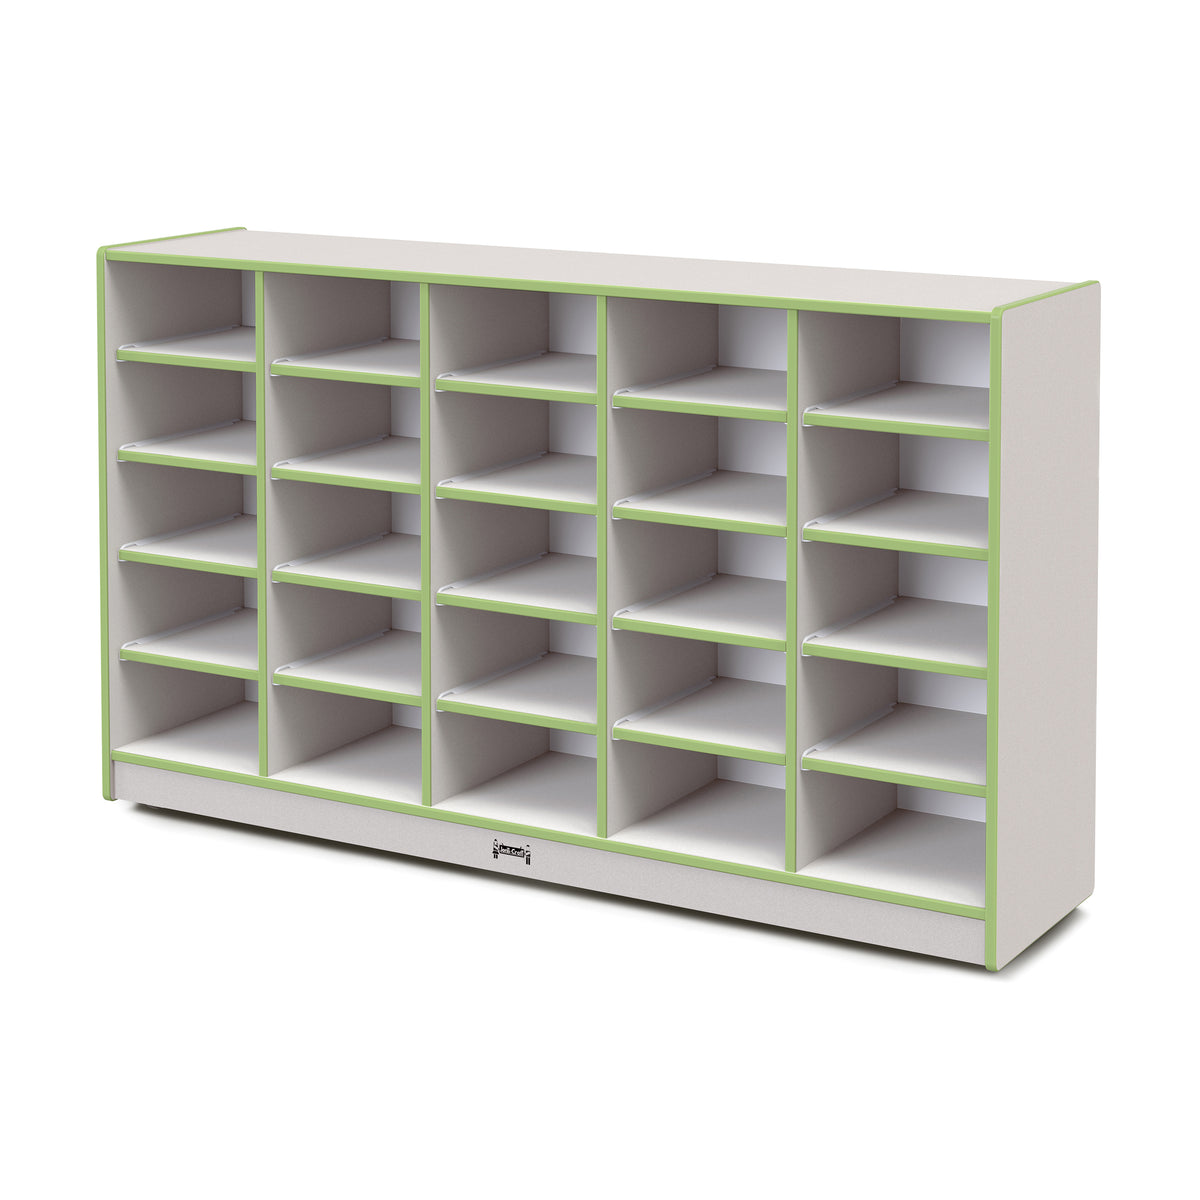 4025JCWW130, Rainbow Accents 25 Tub Mobile Storage - without Tubs - Key Lime Green